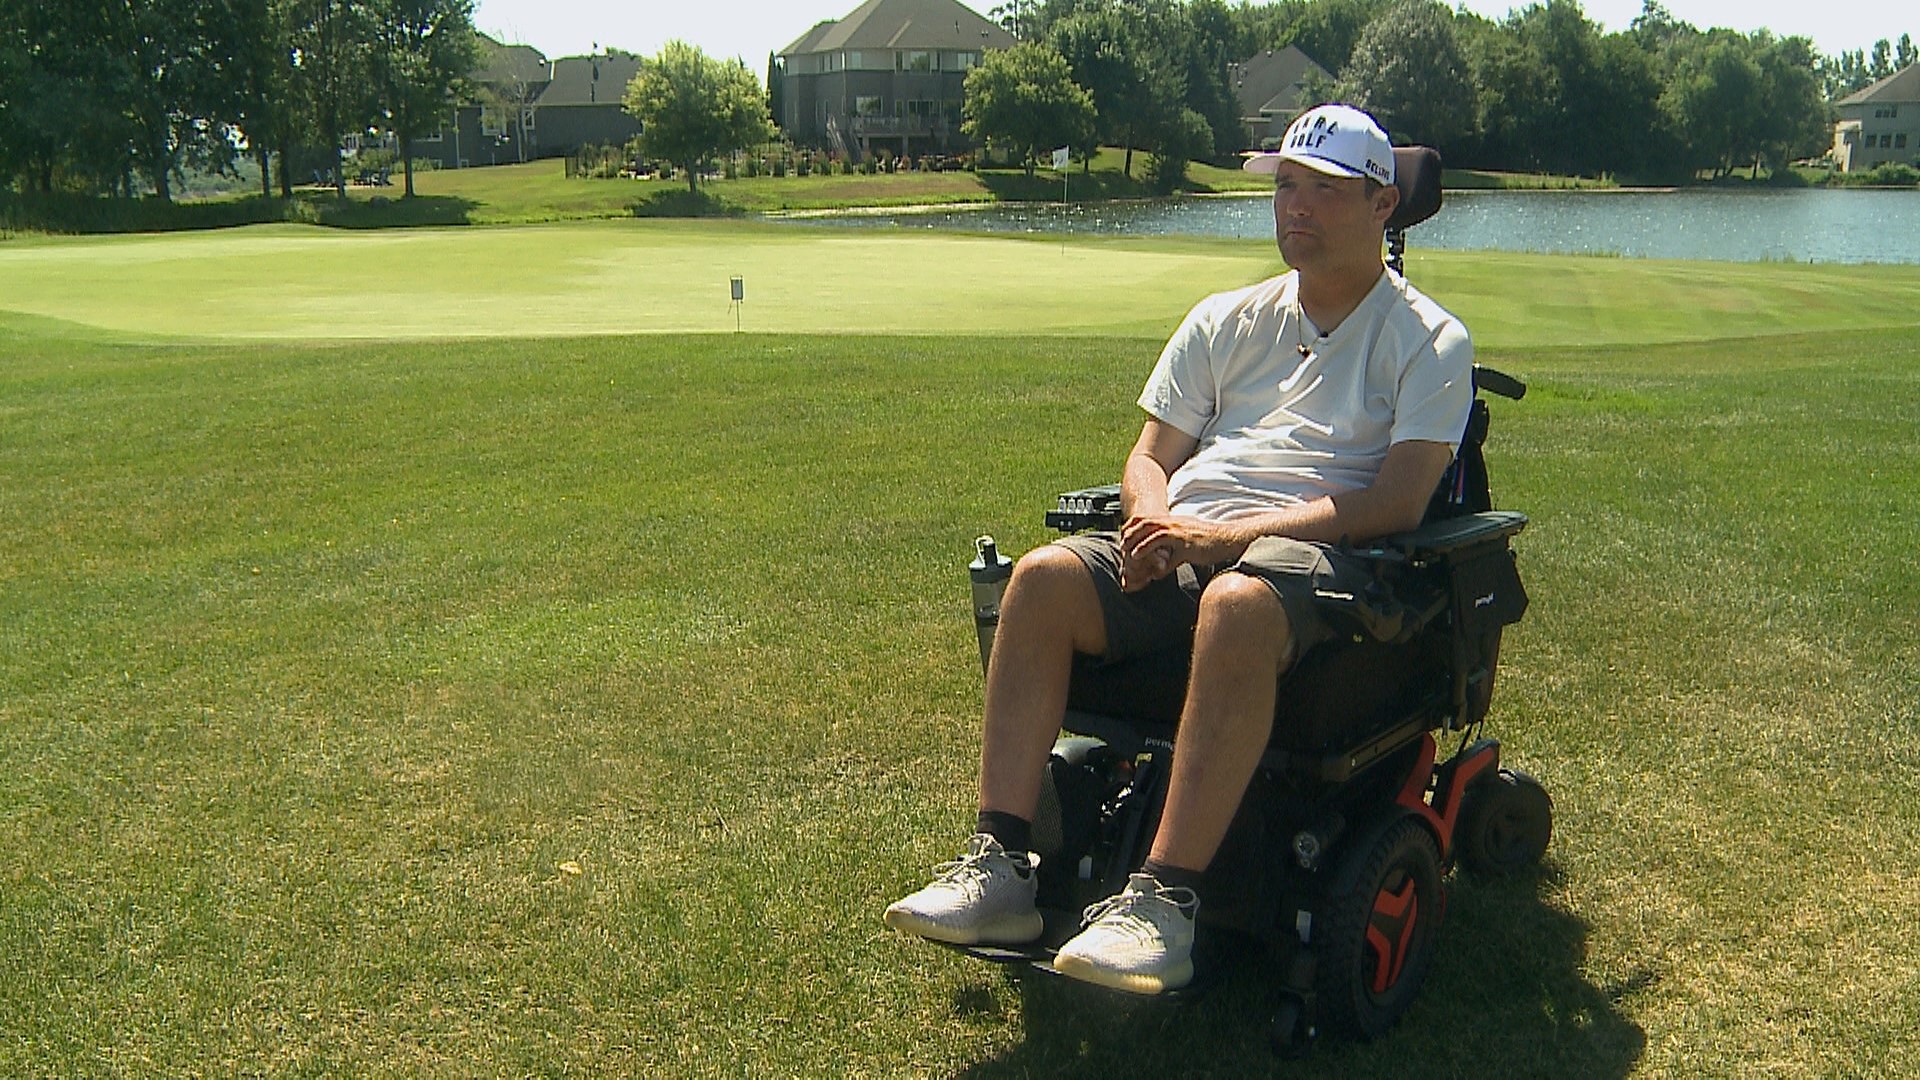 Jack Jablonski is back home in Minnesota this week for his annual golf tournament. He caught up with KARE 11 to share an update on how he's doing.